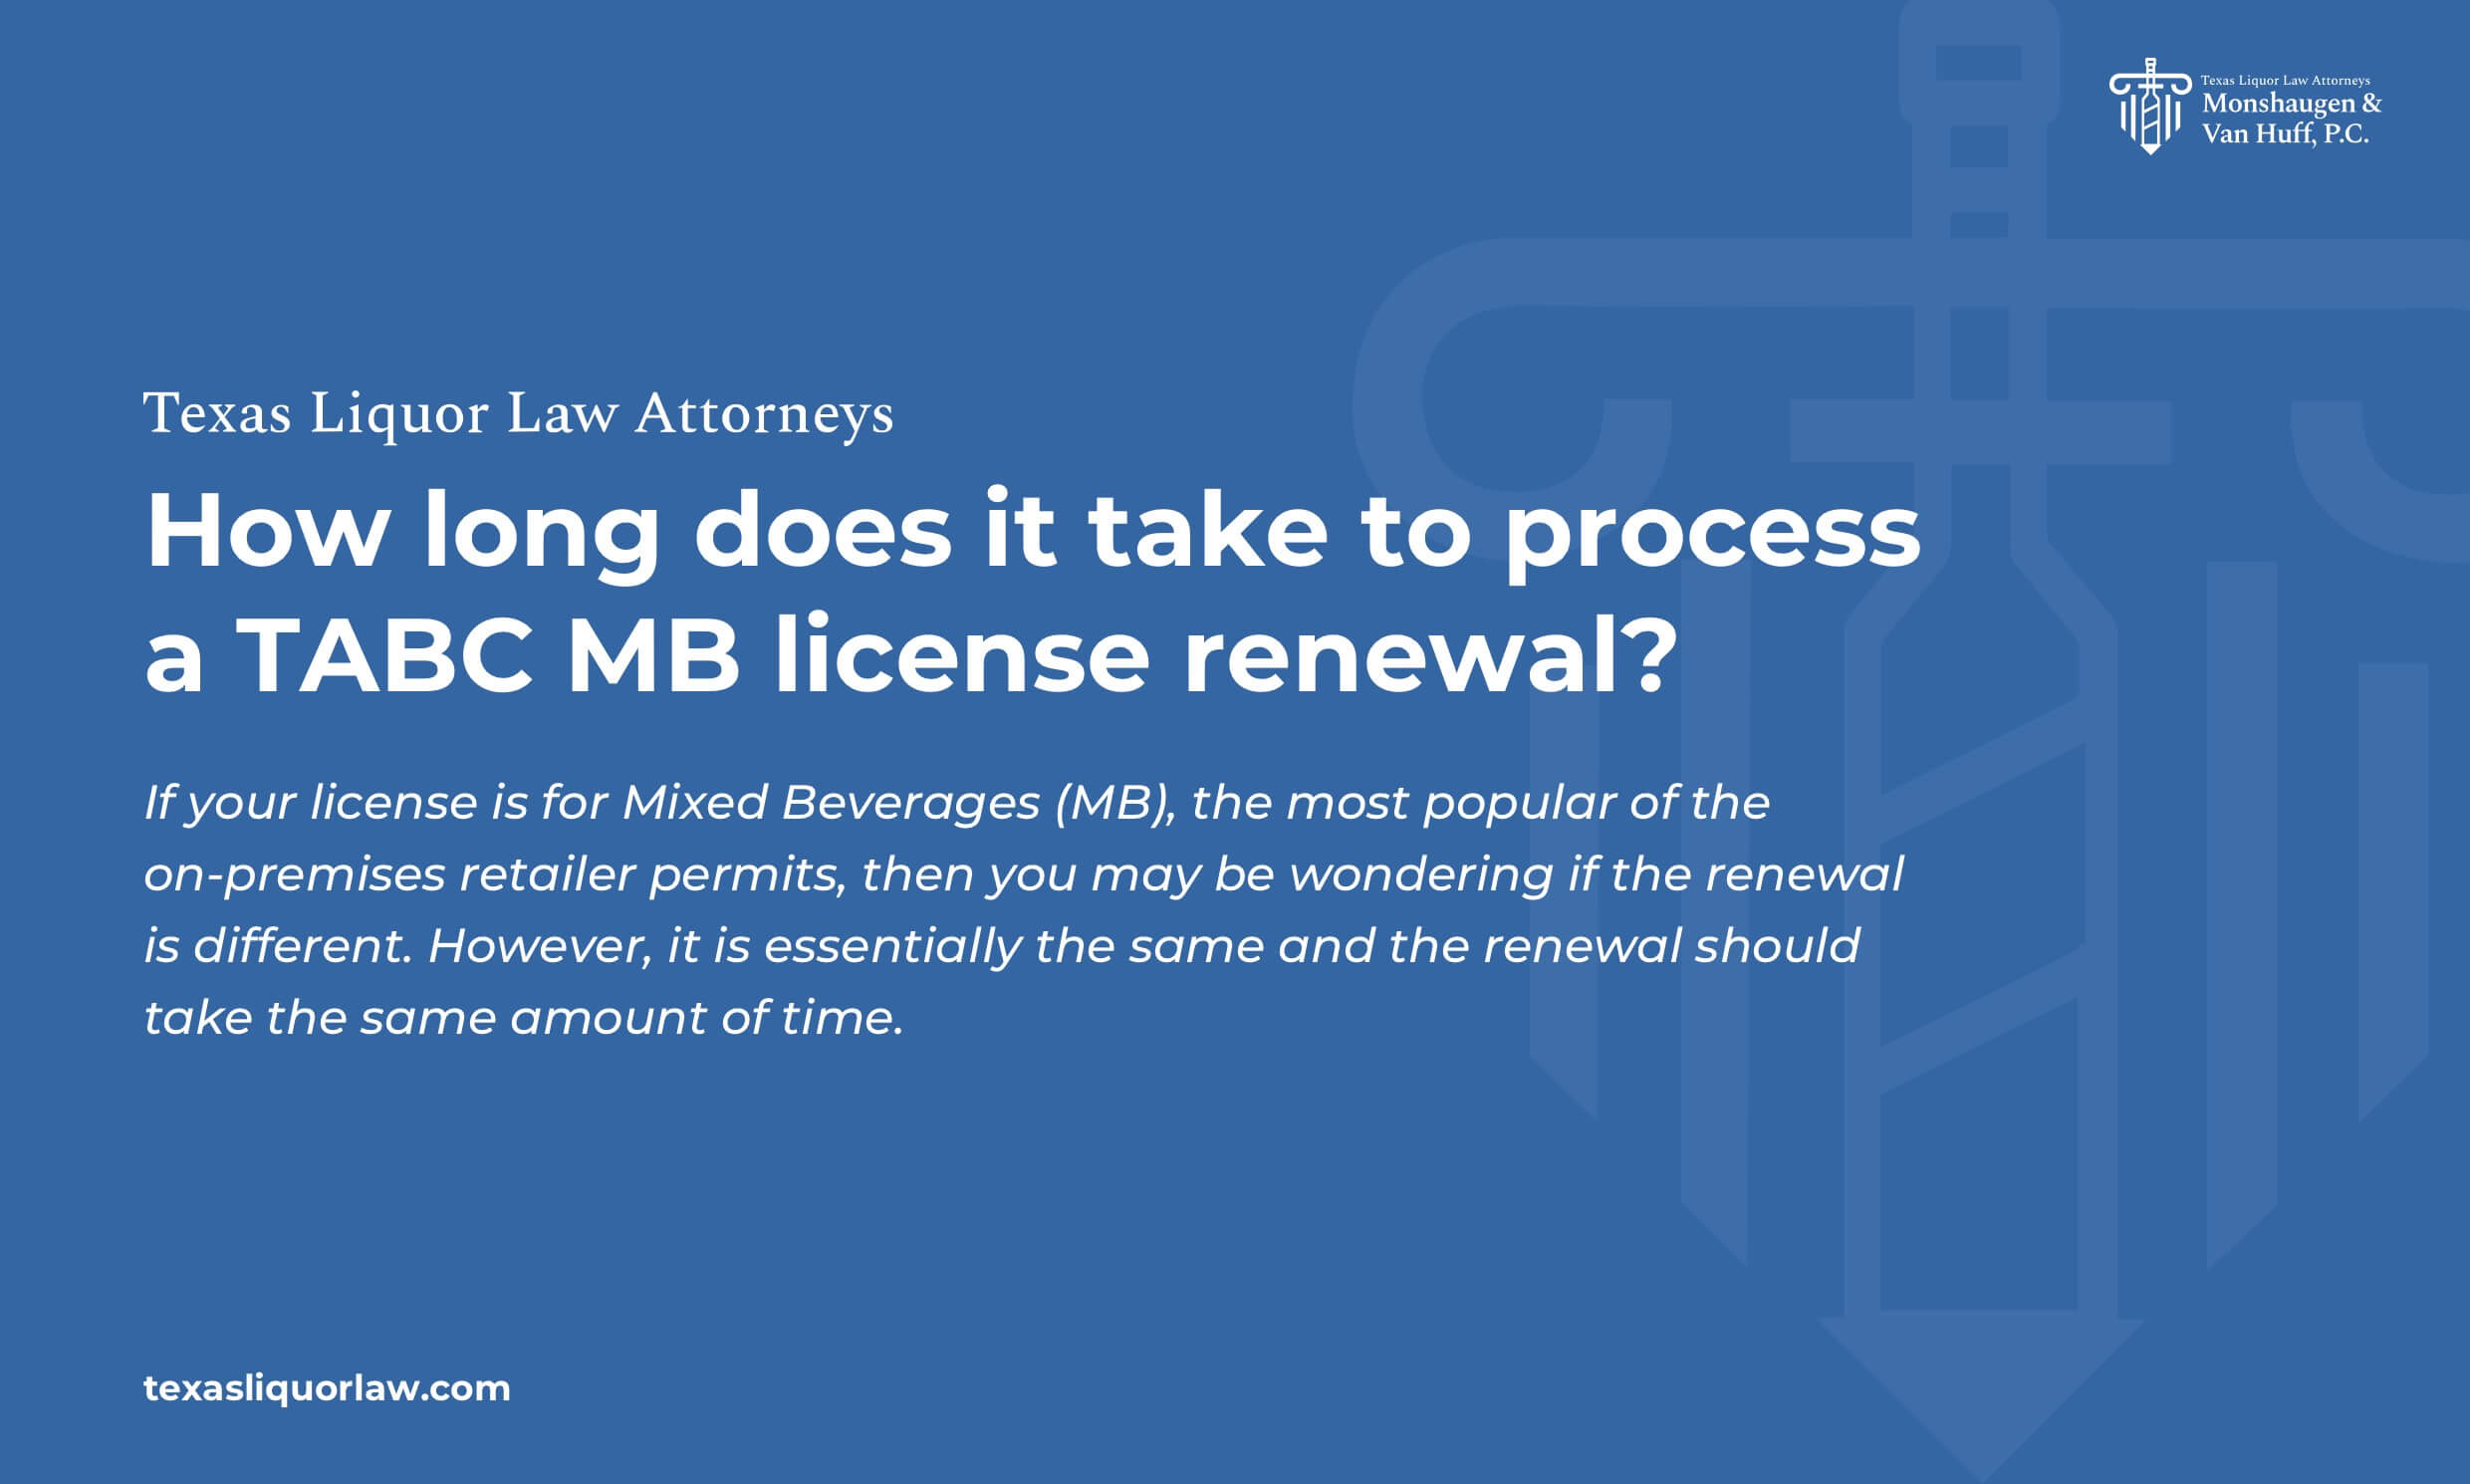 How long does it take to process a TABC MB license renewal?